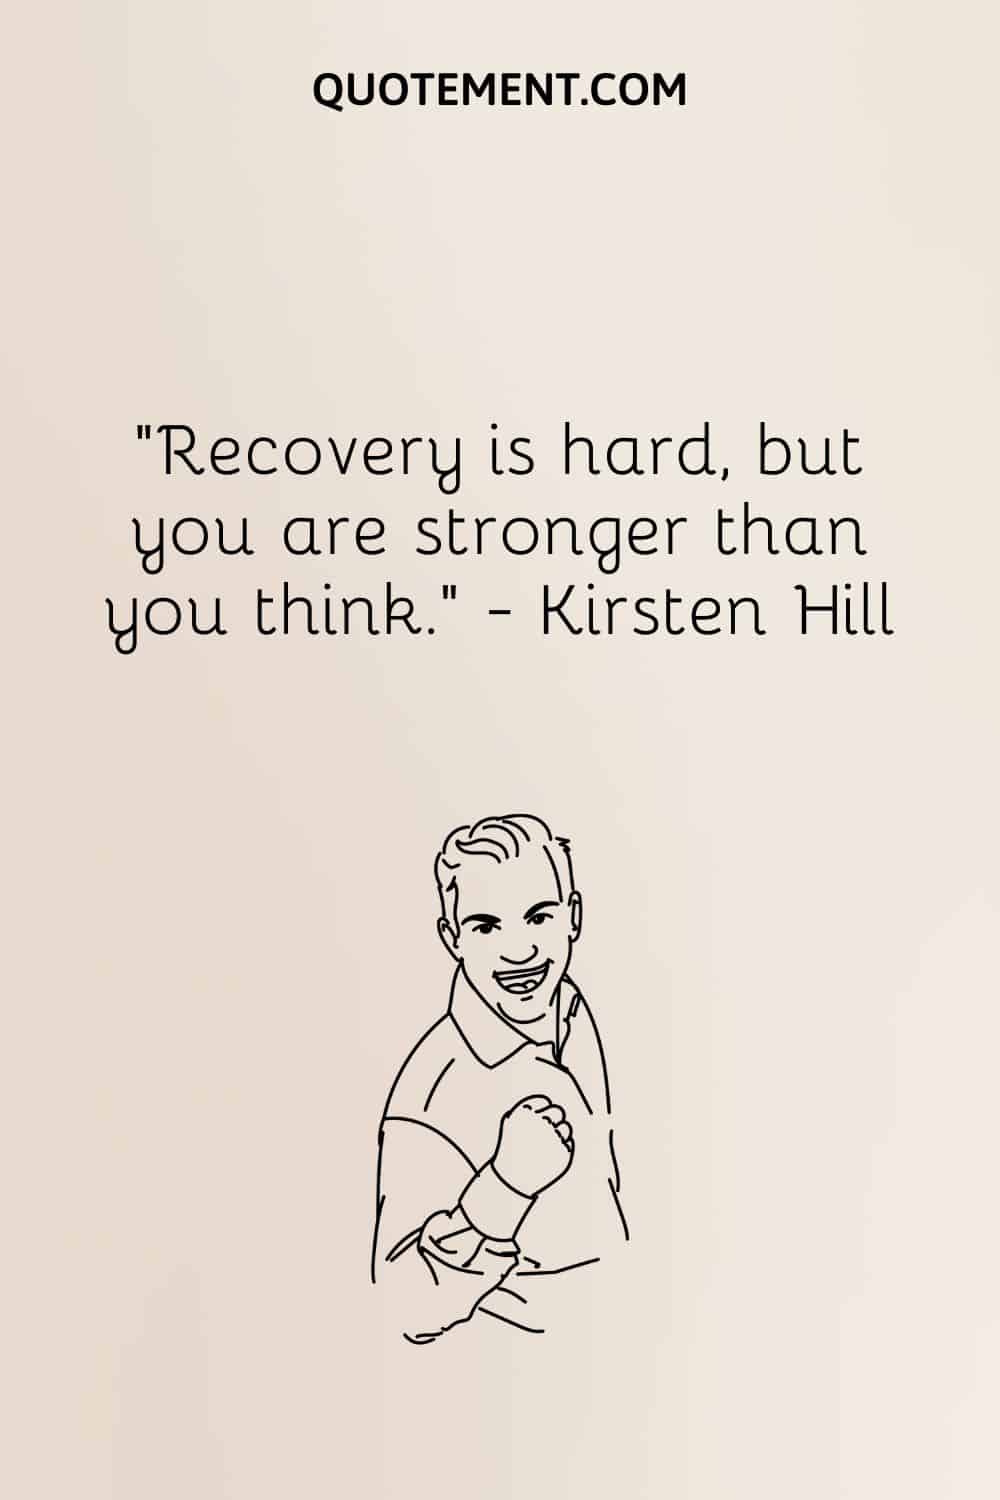 Recovery is hard, but you are stronger than you think